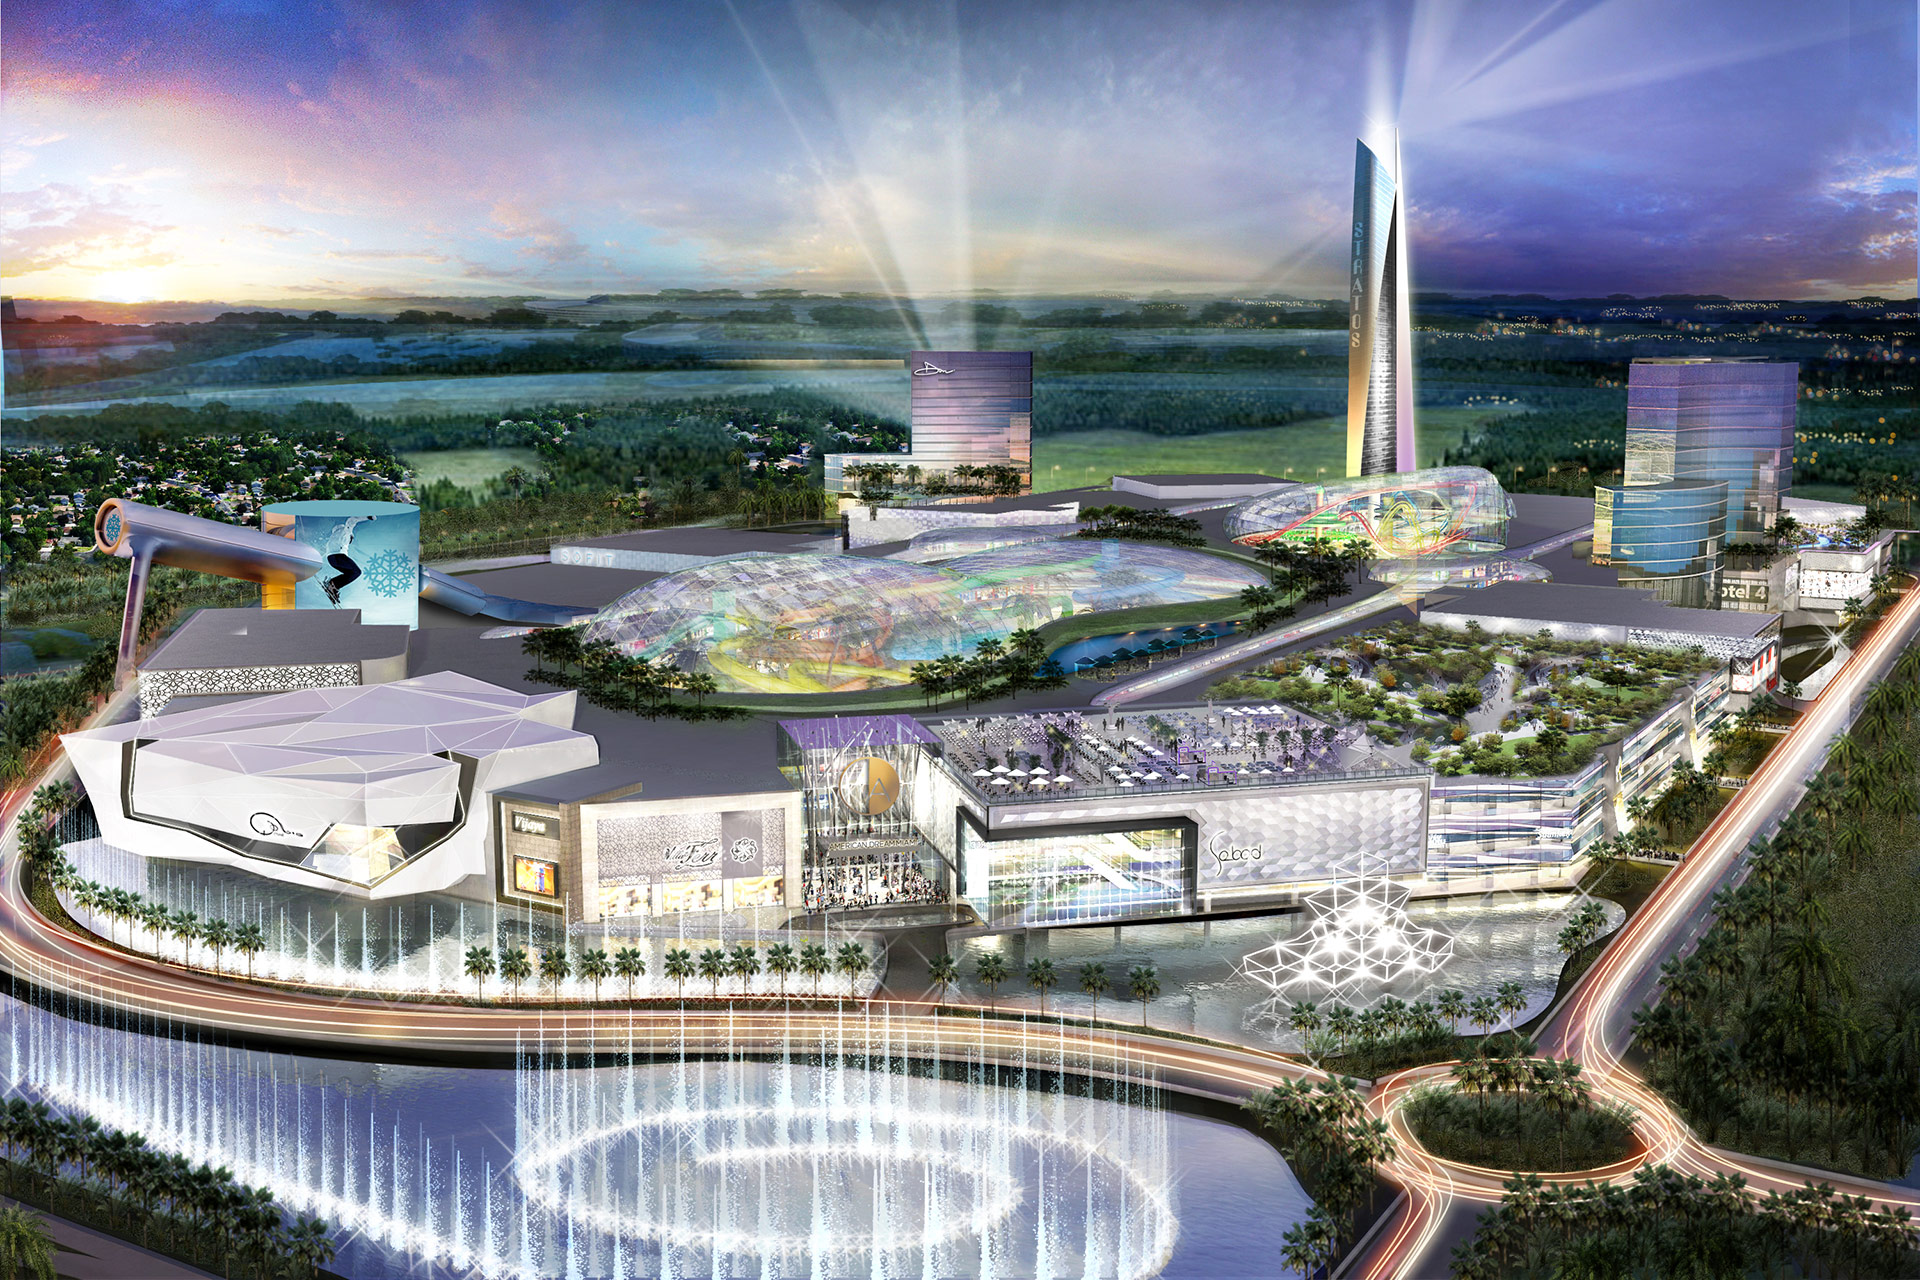 Construction of the largest mall of America is moving full speed ahead